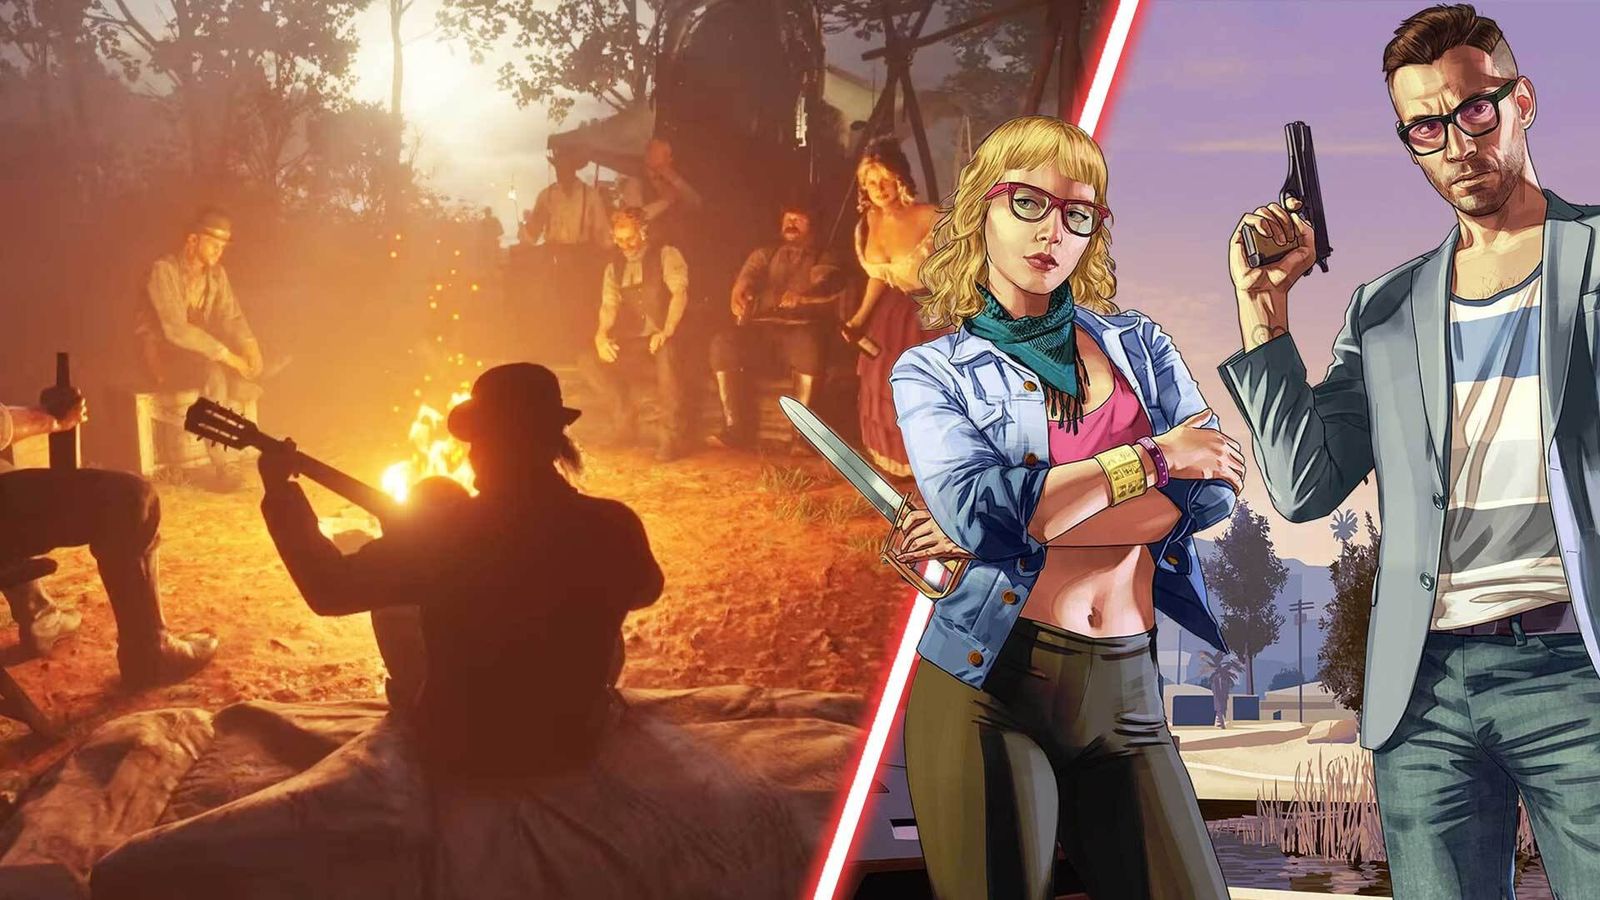 Red Dead Redemption 2's gang camp alongside some GTA characters.